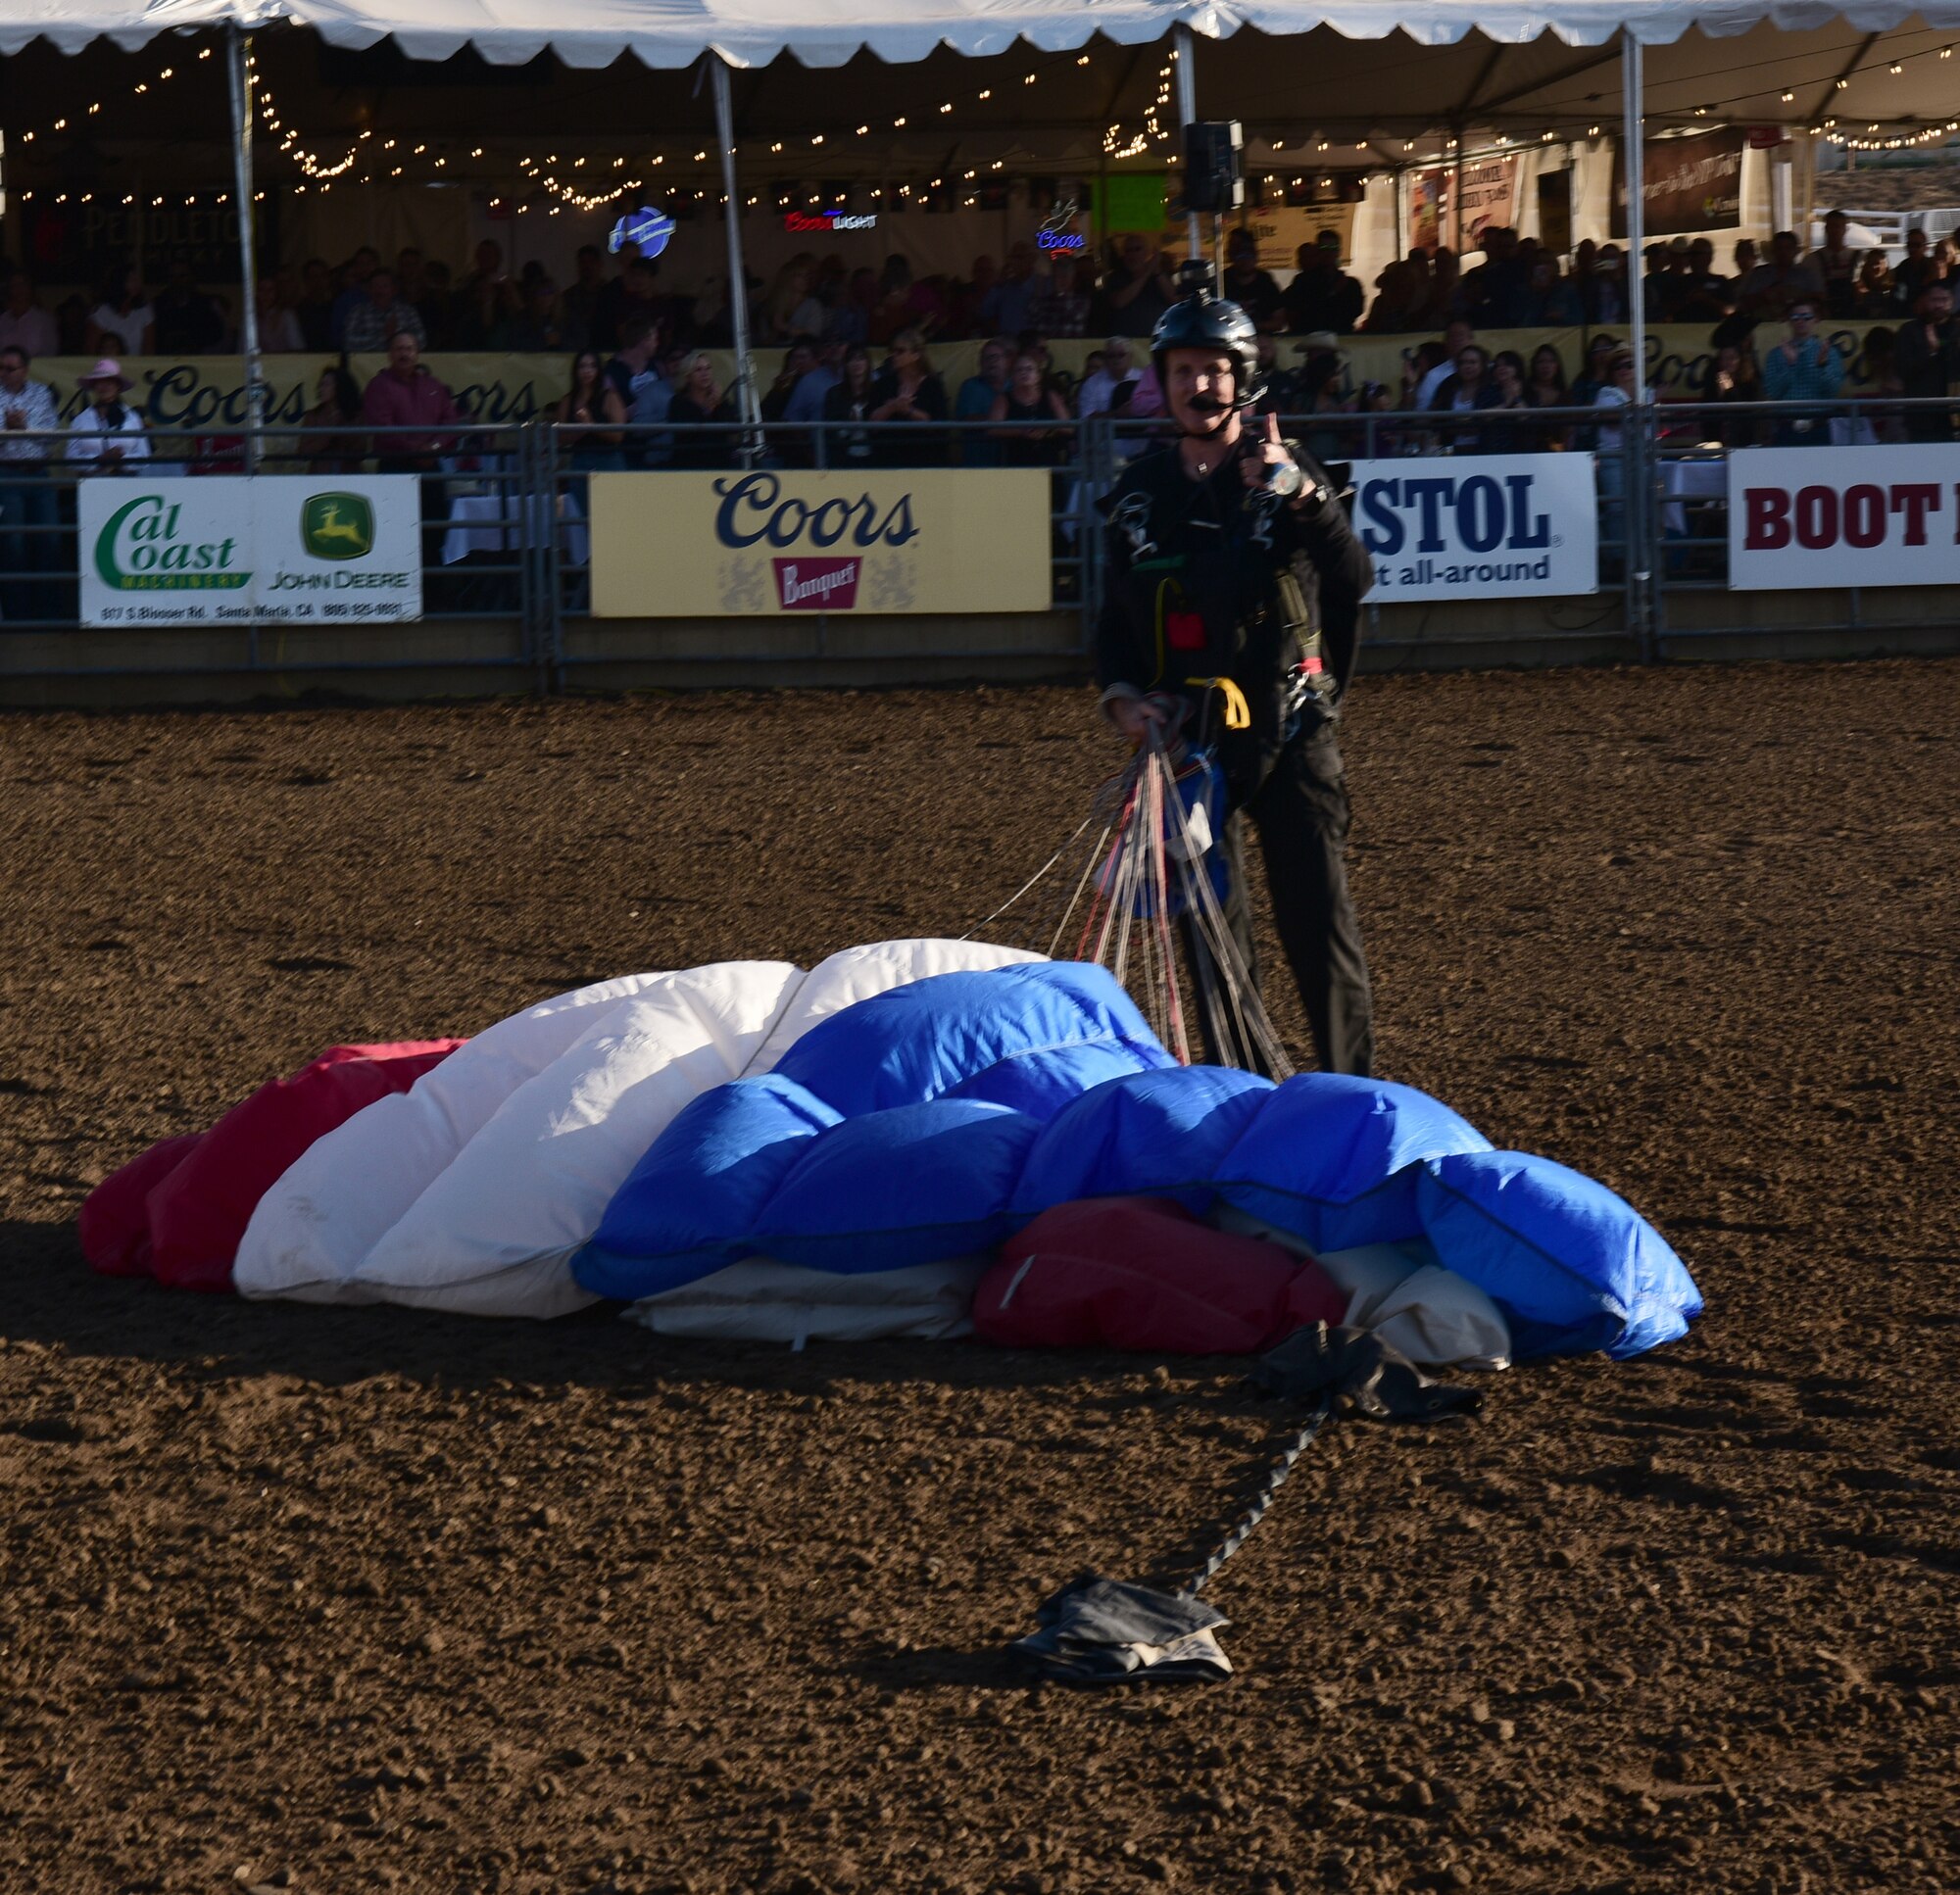 Skydiver, Kent Lane, speaks to the crowds in the stands at the Santa Maria Elks Rodeo in Santa Maria, California, Sept. 4, 2021. (U.S. Space Force photo by Airman First Class Tiarra Sibley)